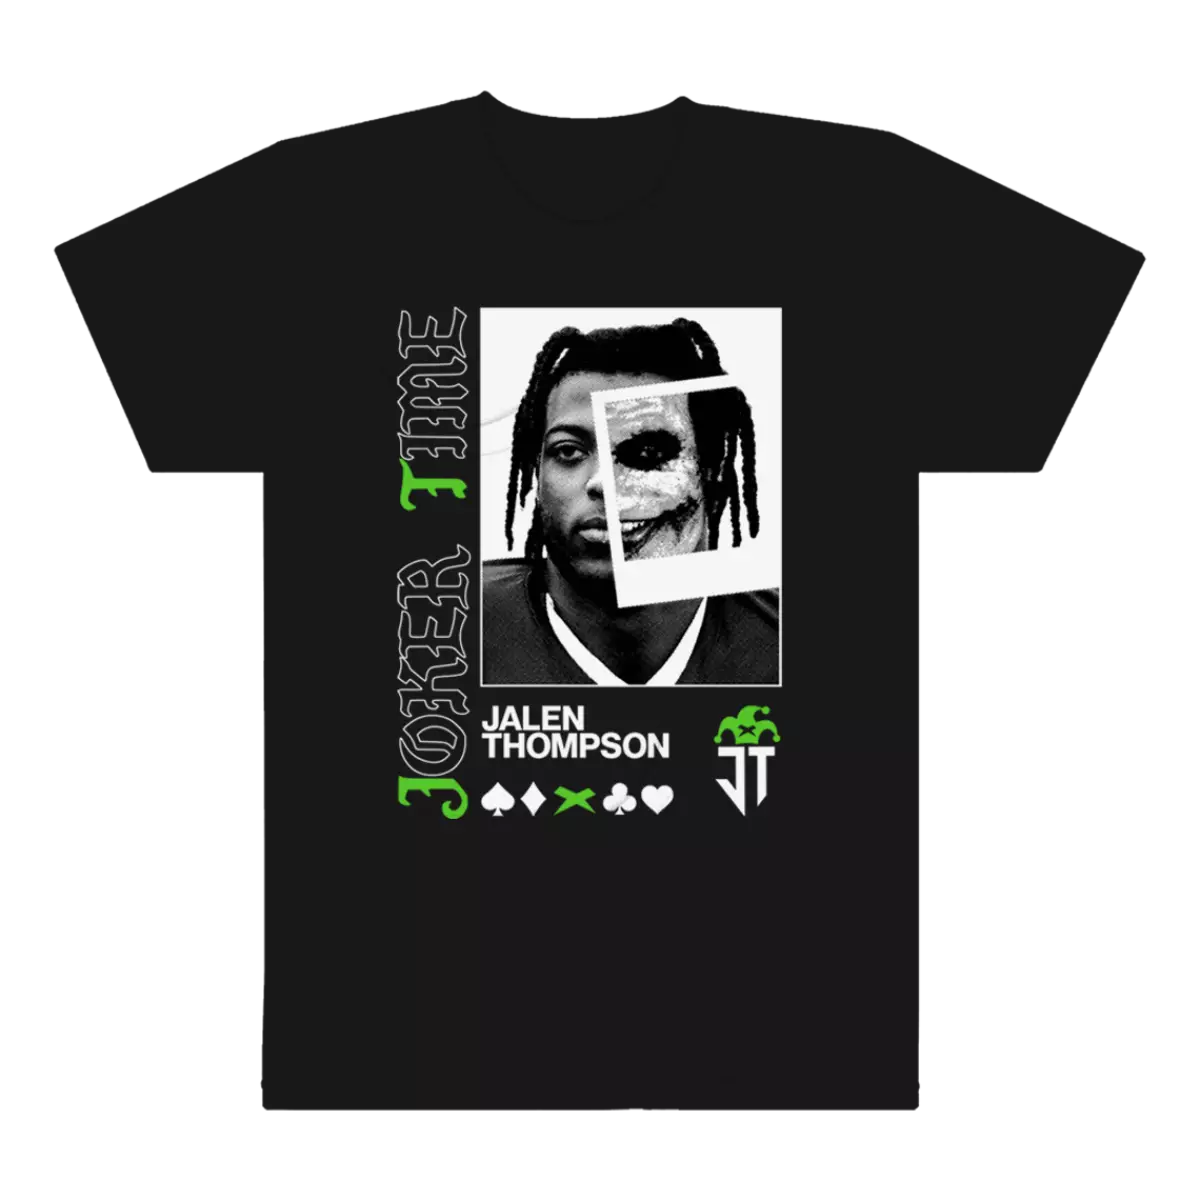 Black t-shirt with an image of Jalen Thompson against a white background and a photo showing half of Joker's face over Jalen's face.